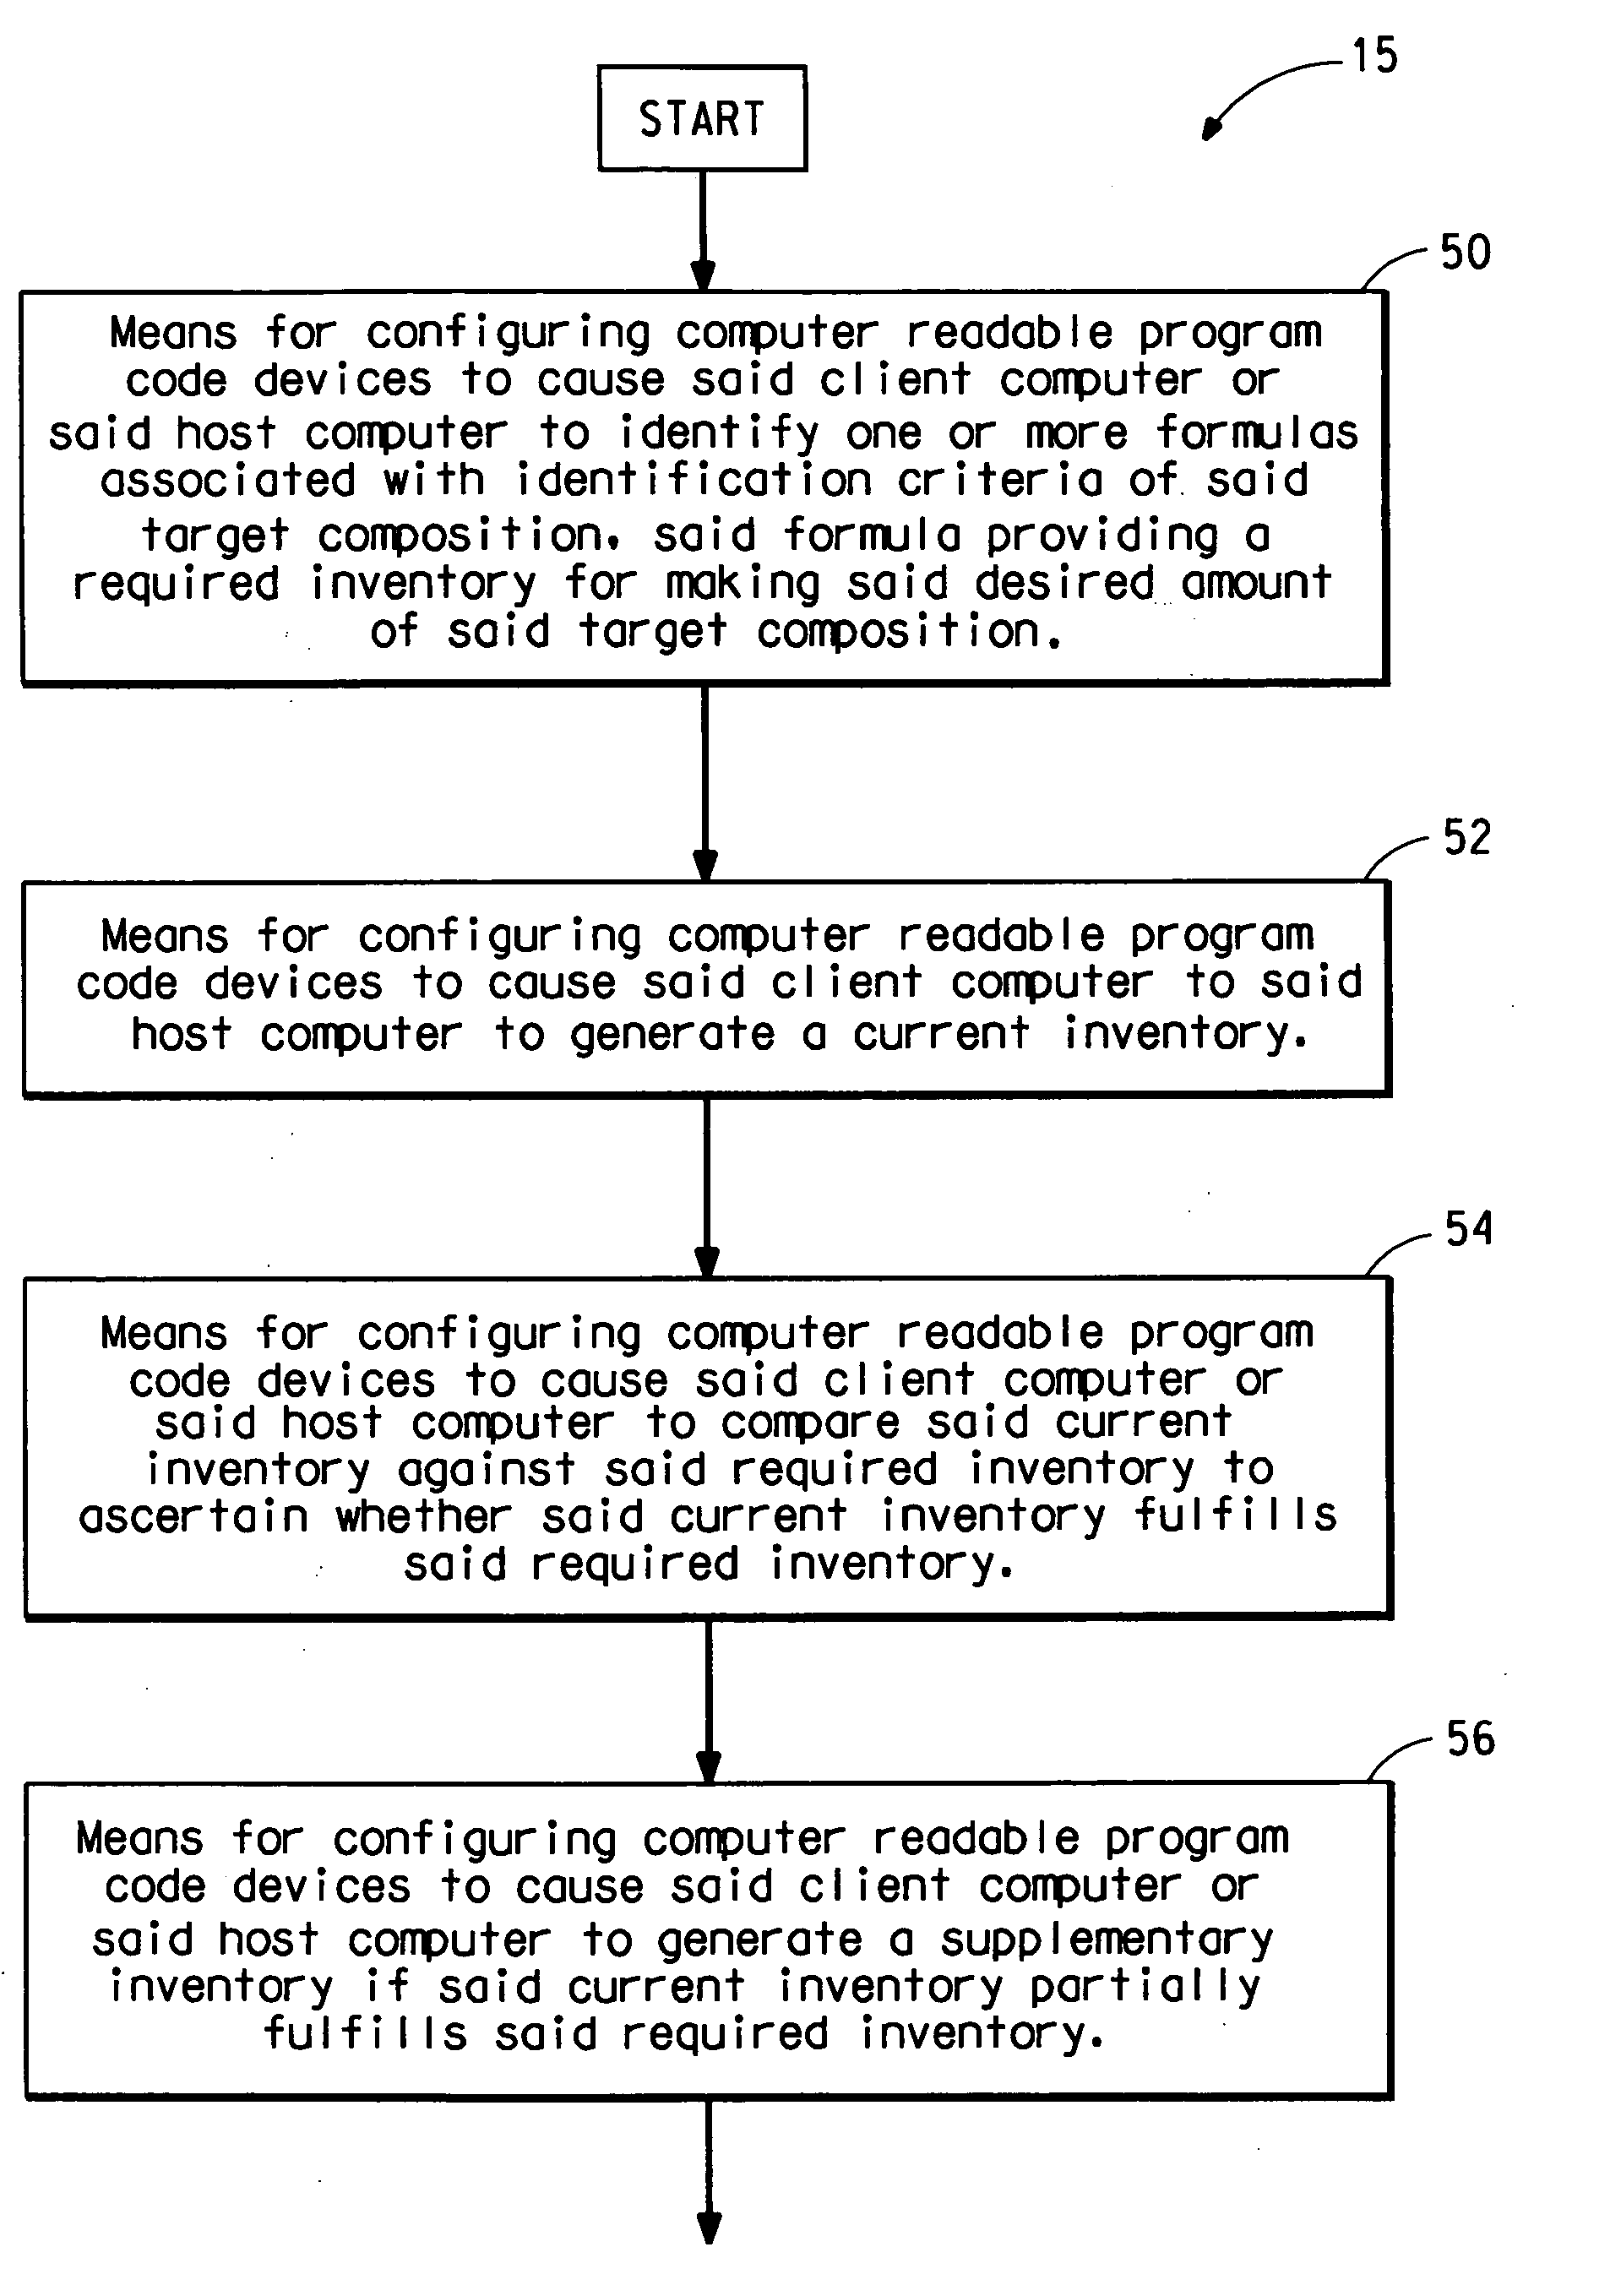 Monitoring device used for producing compositions